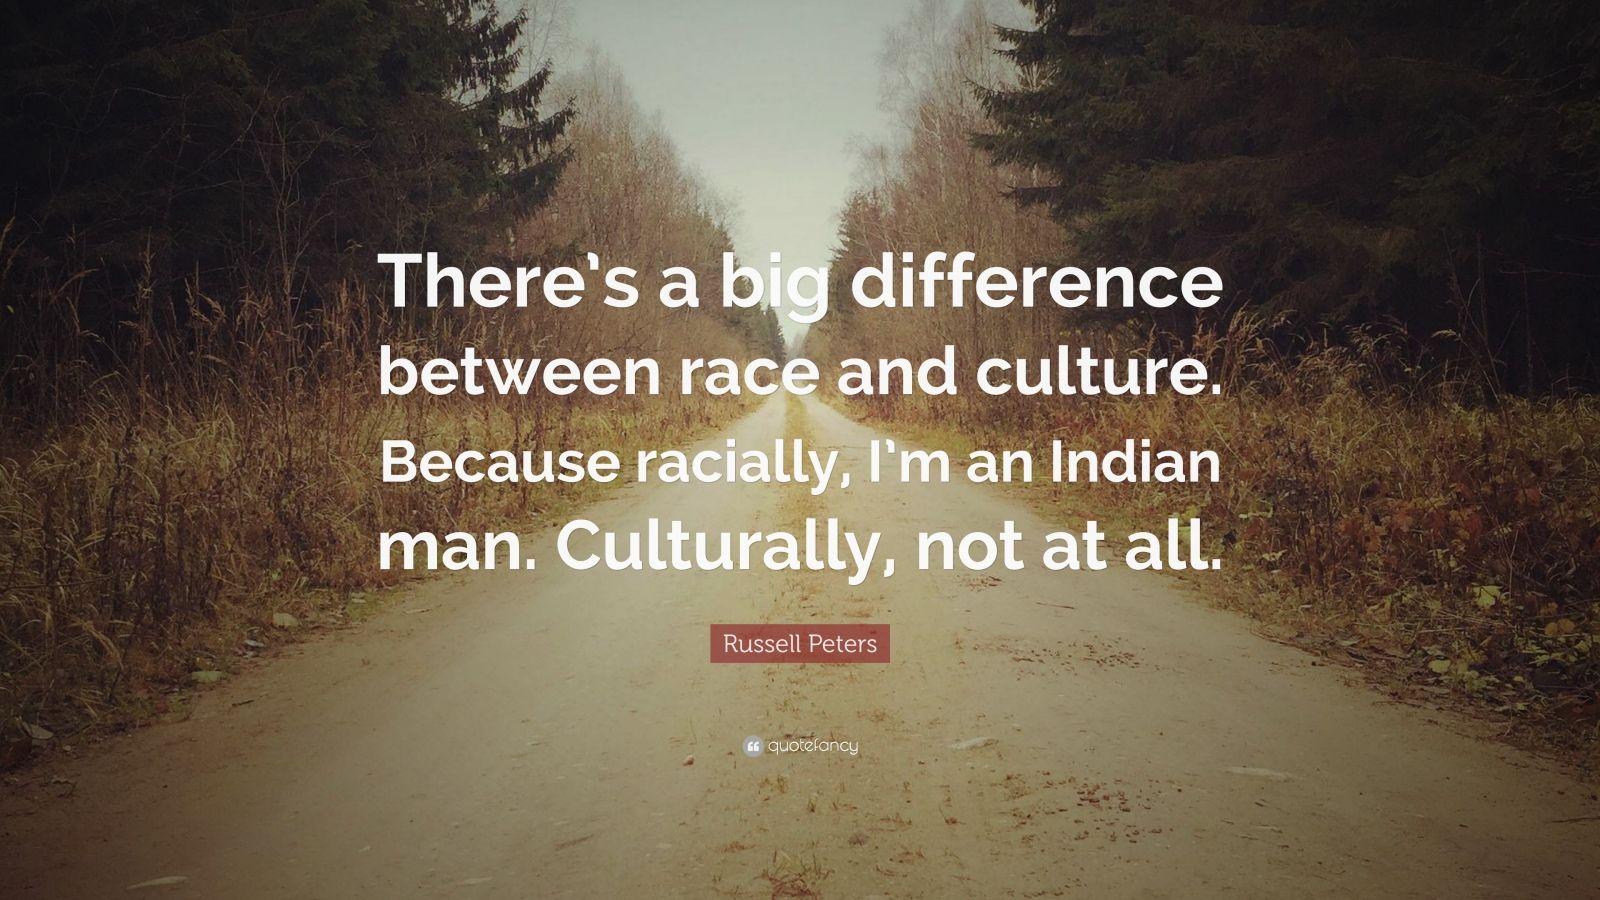 Russell Peters Quote “There’s a big difference between